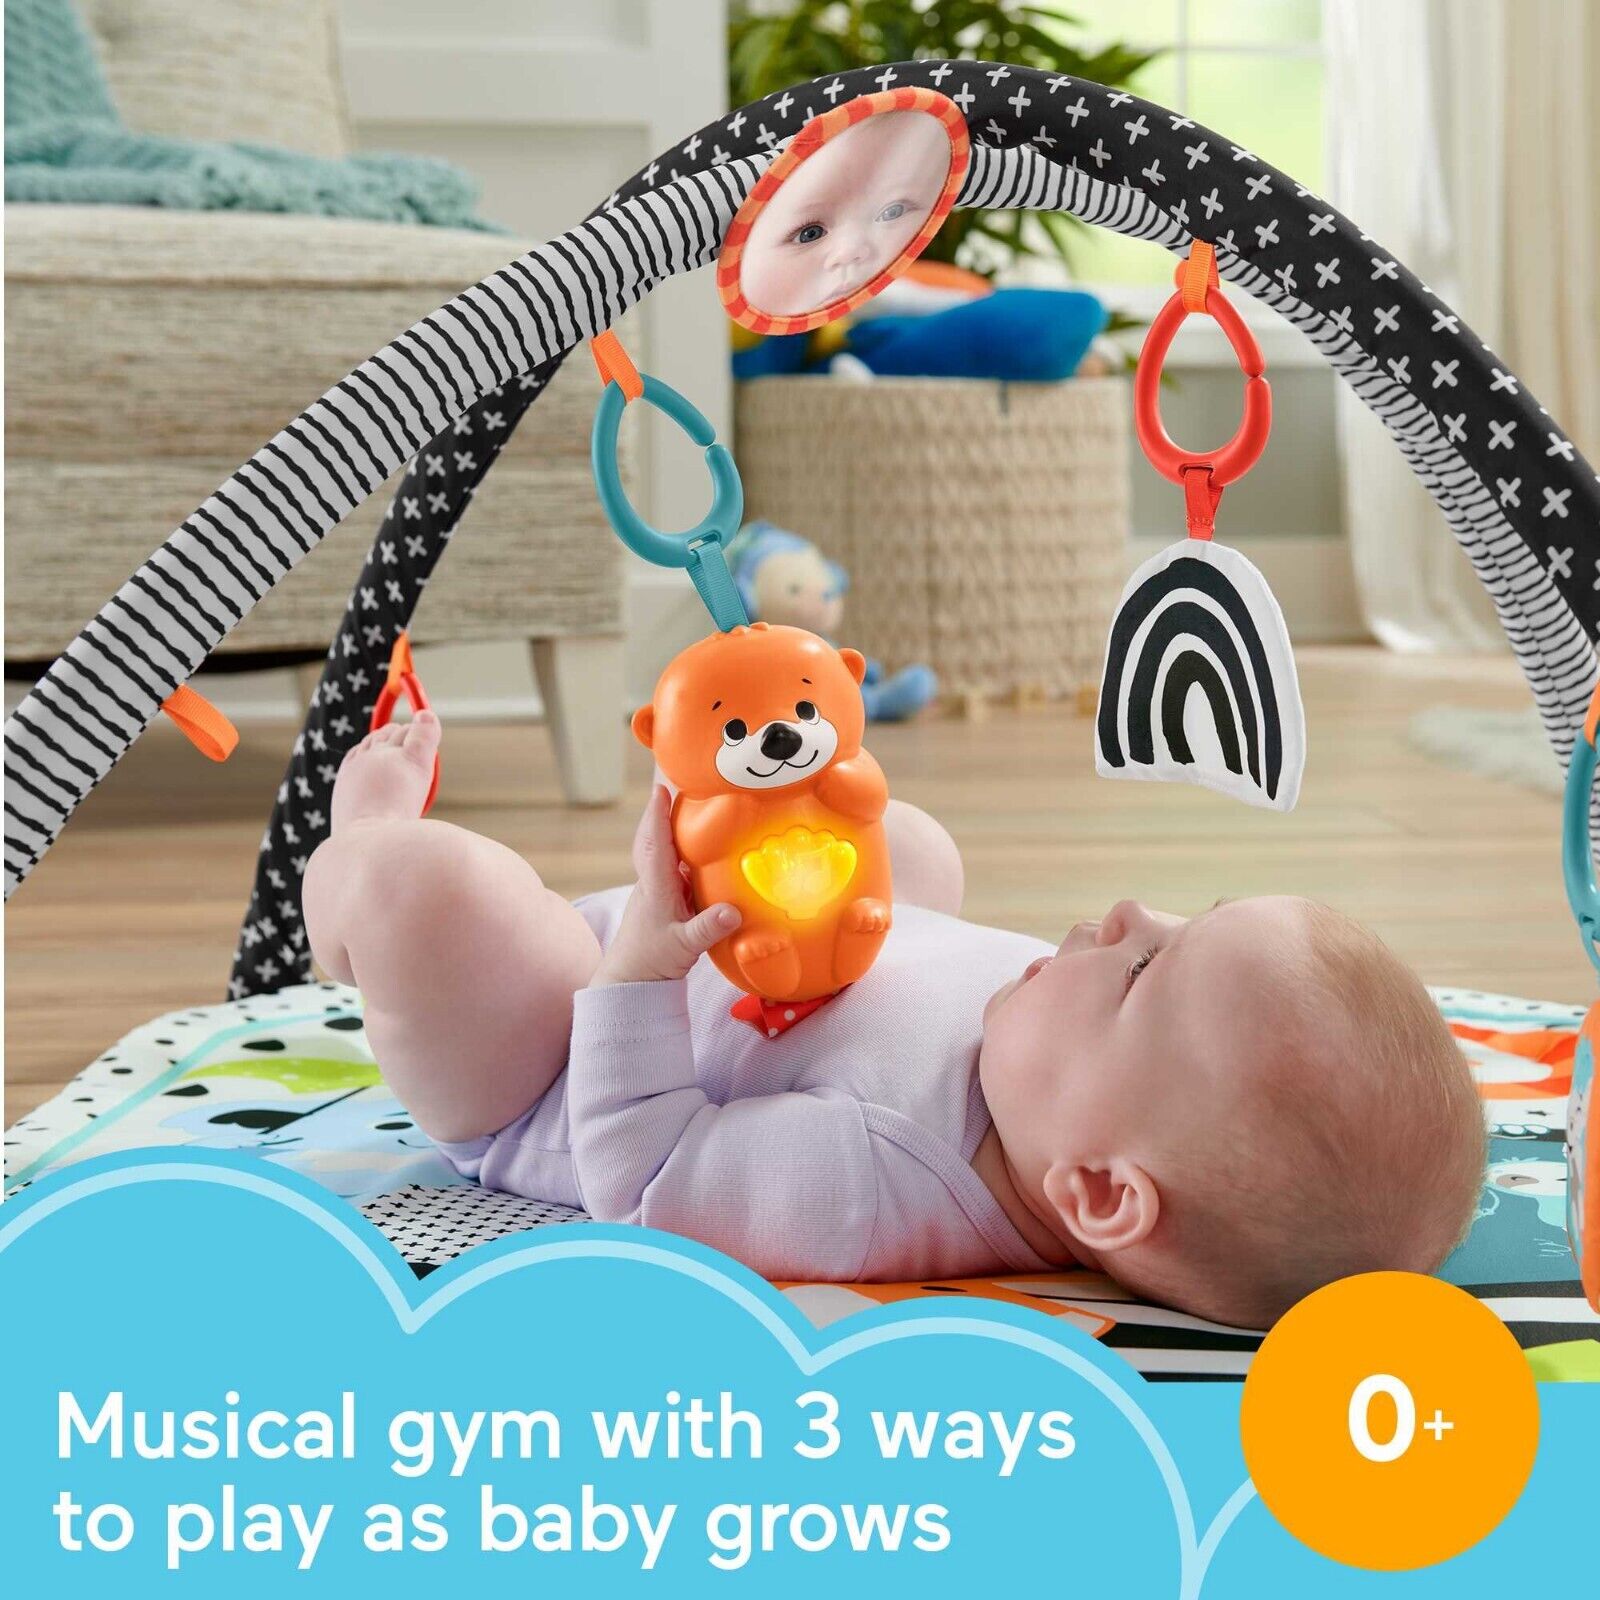 Fisher Price Activity Gym for Infants and Toddlers